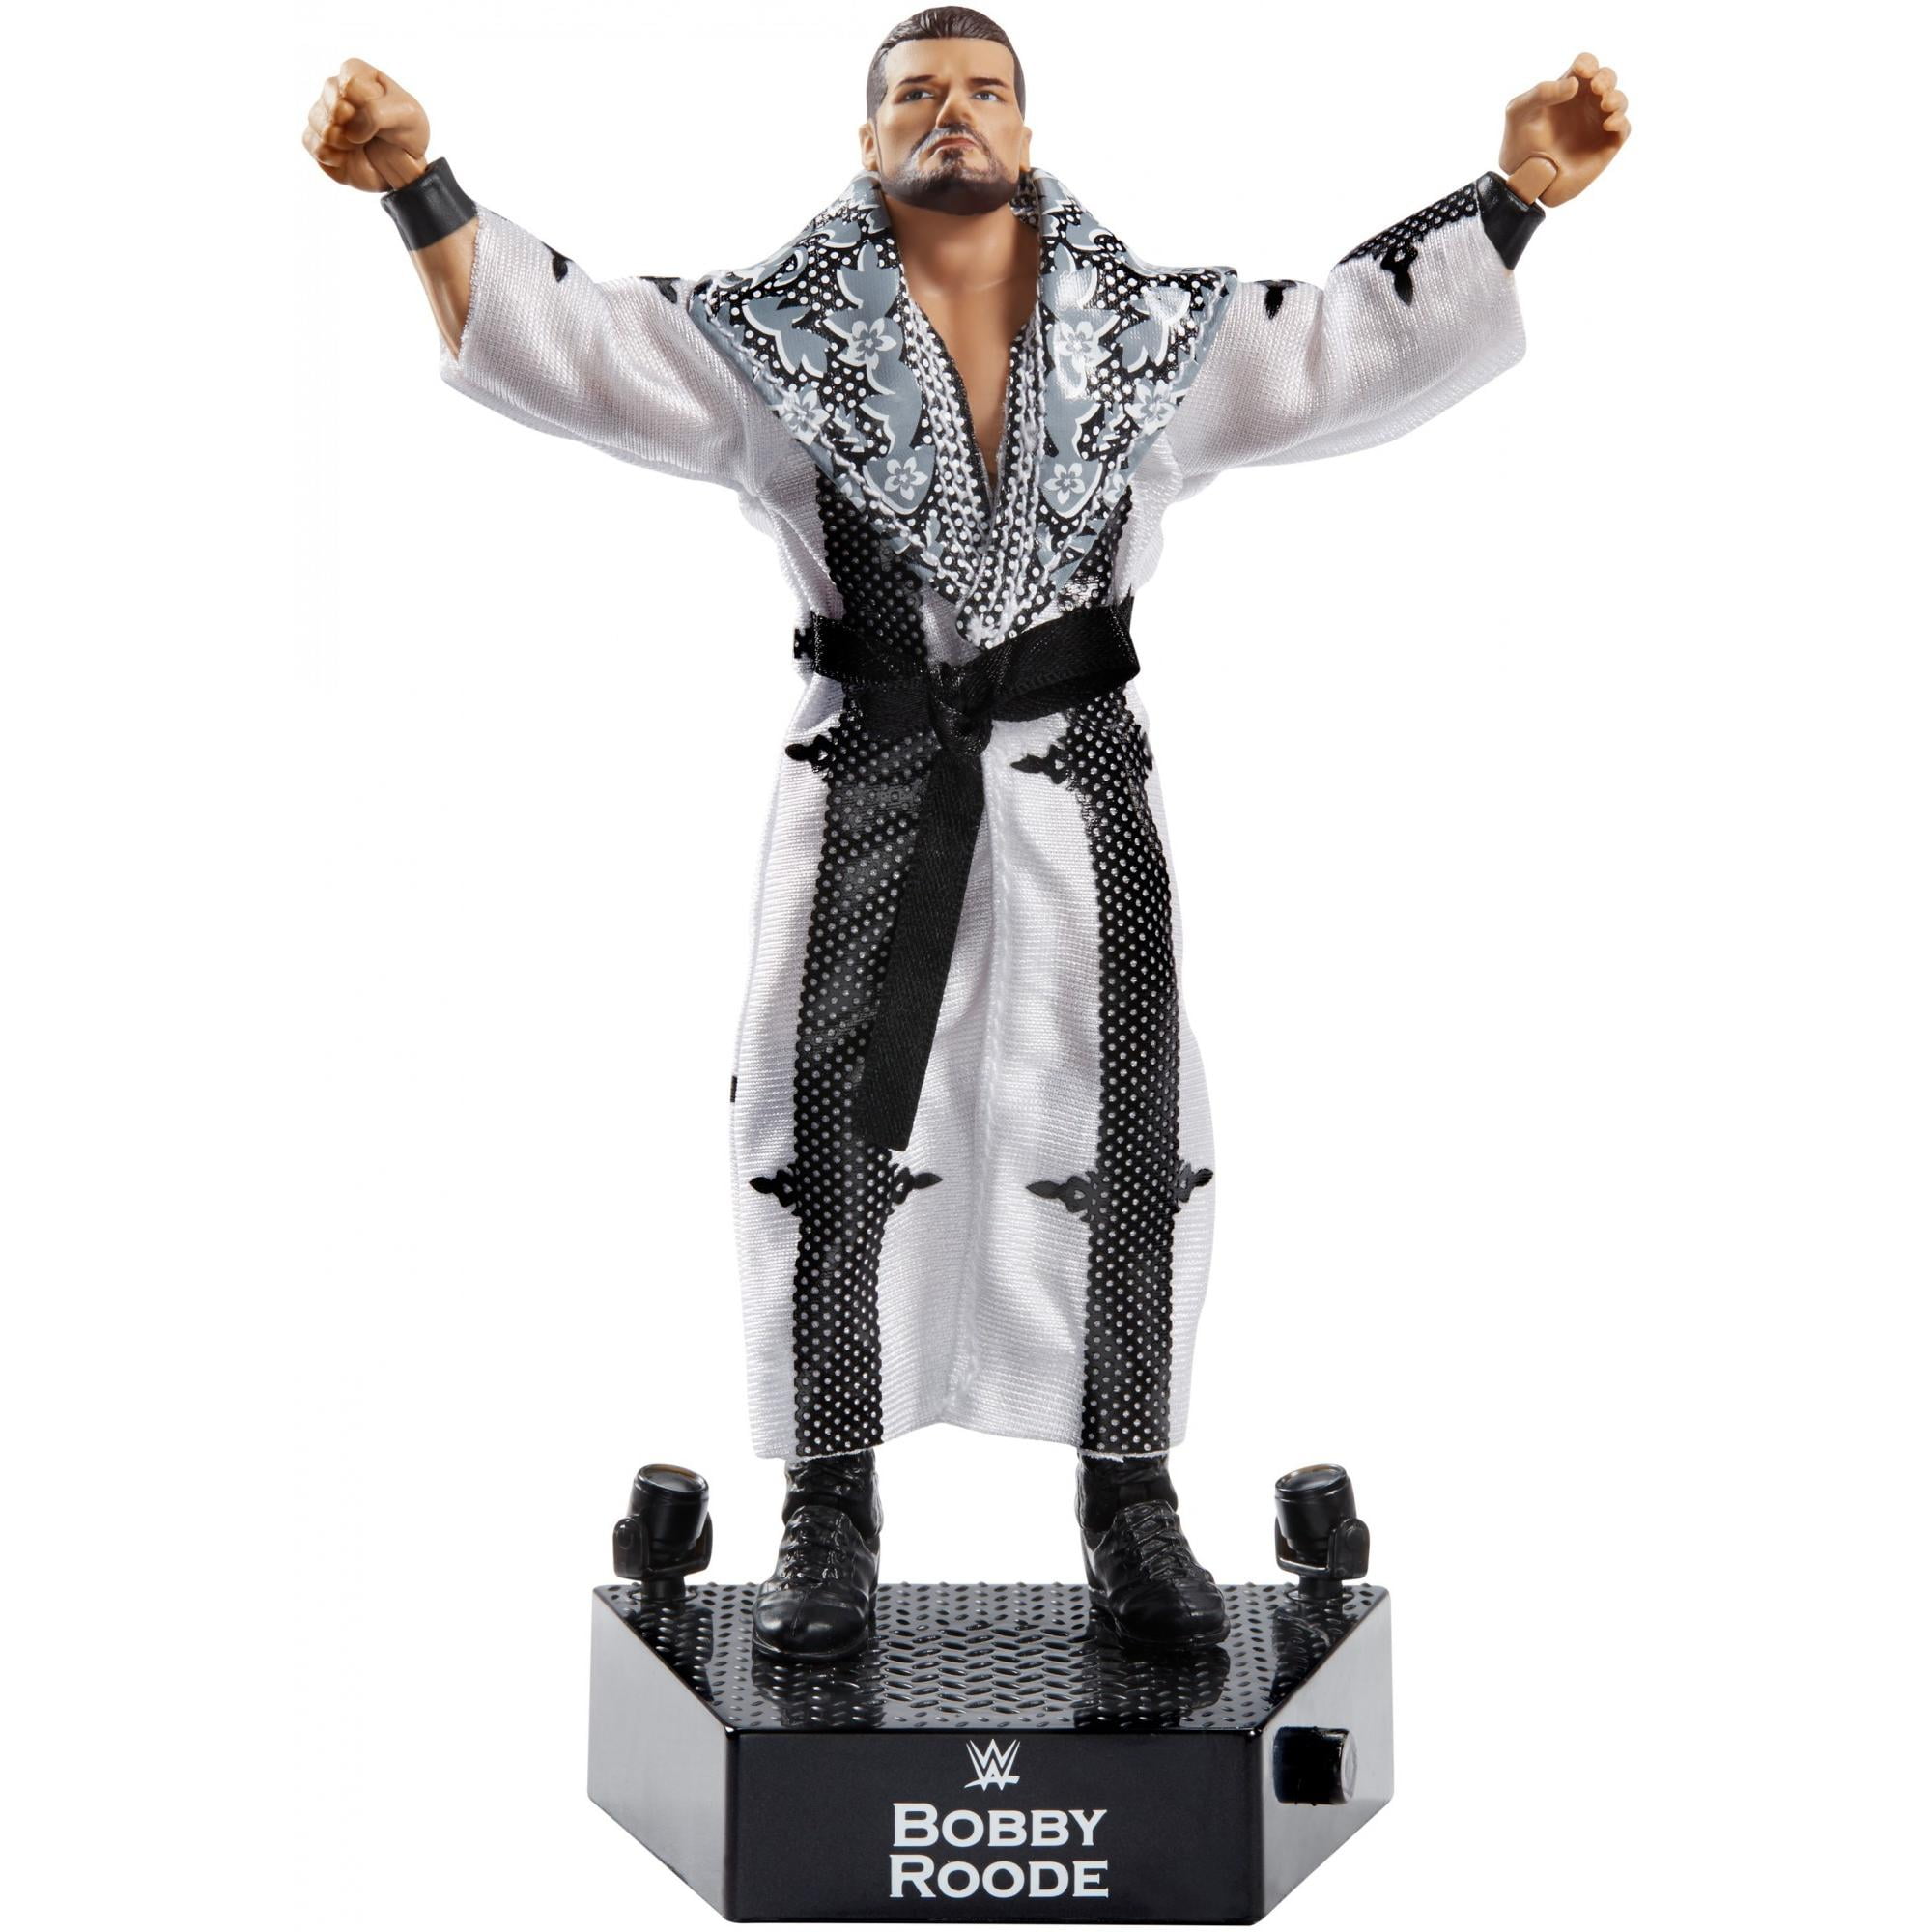 Defining Moments and Entrance Greats Wrestling Action Figures WWE Elite 